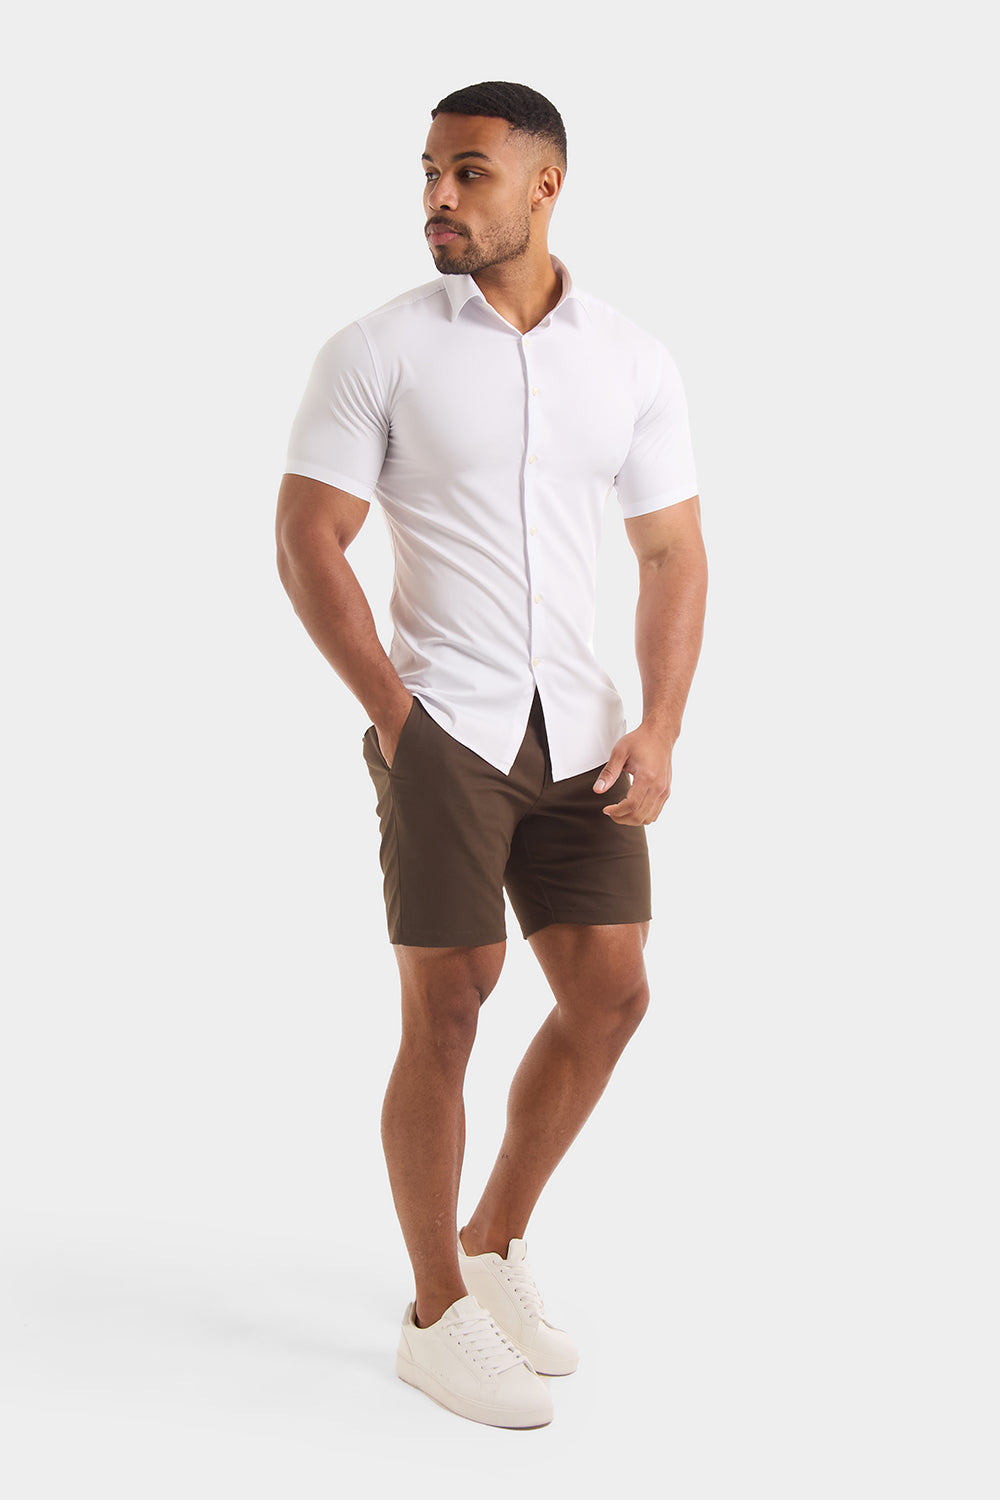 Muscle Fit Chino Shorts in Khaki - TAILORED ATHLETE - ROW